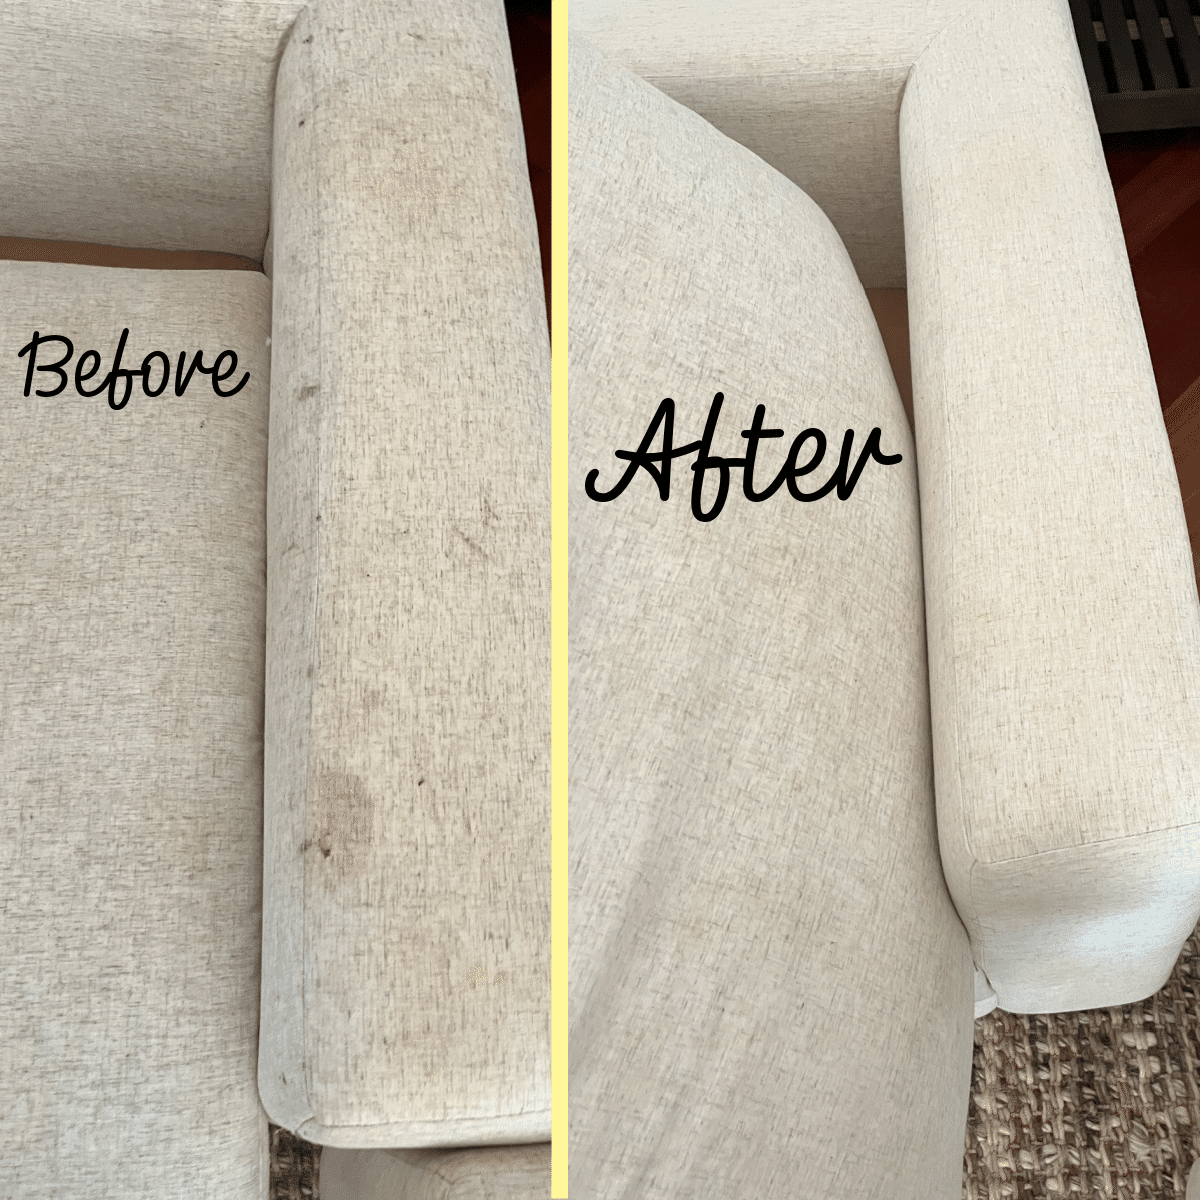 Upholstery cleaning in Scottsdale, AZ